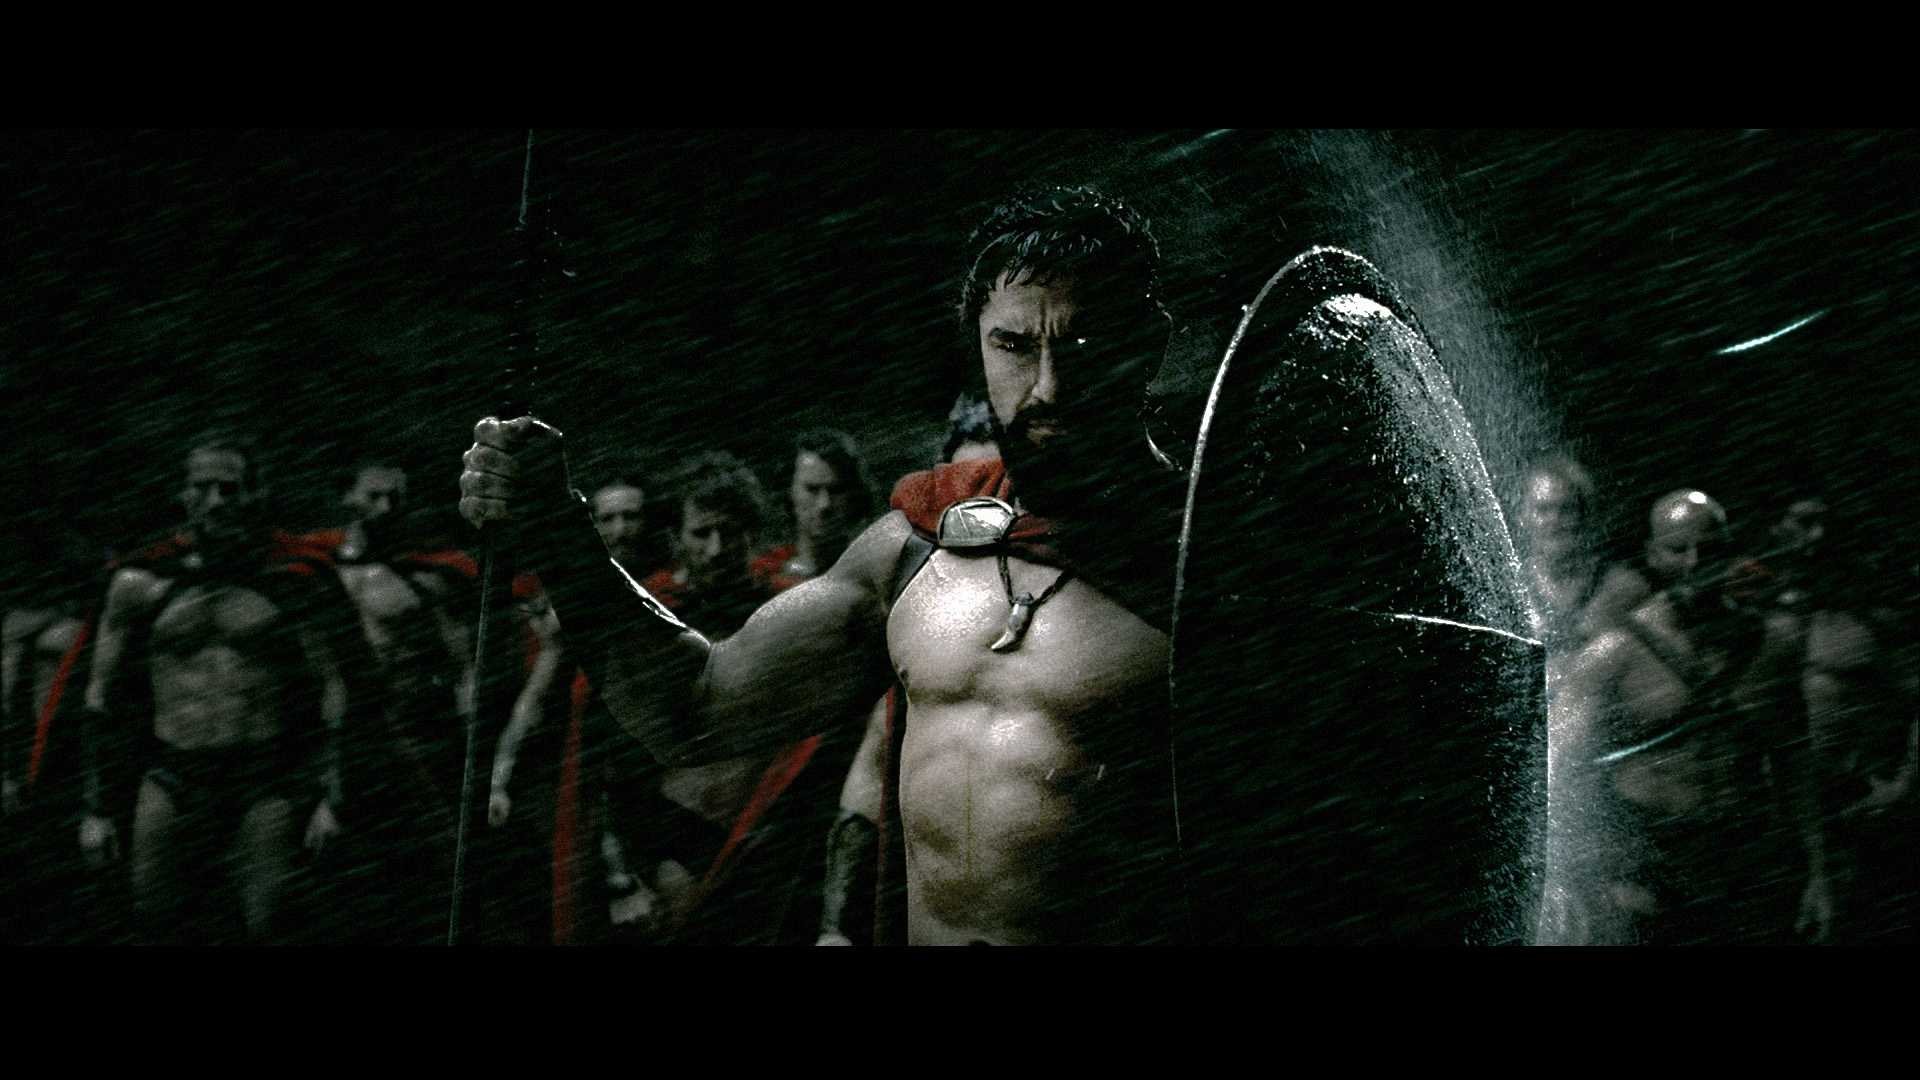 1920x1080 300 movie wallpapers in high quality - Frank Miller comic - Sparta